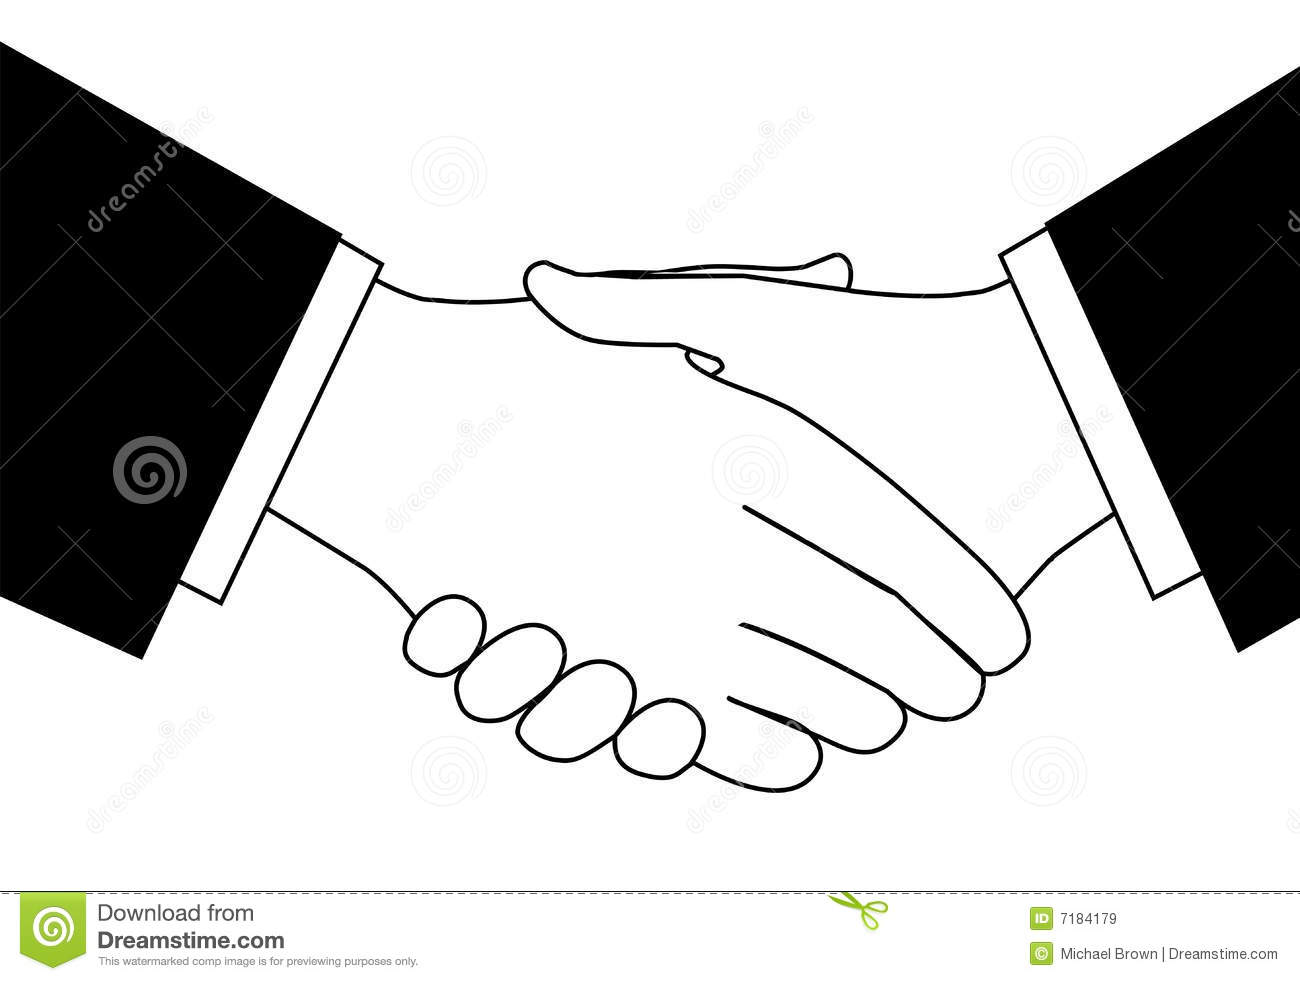 Handshake Clipart Sketch Of Business People Shaking Hands To Meet Or